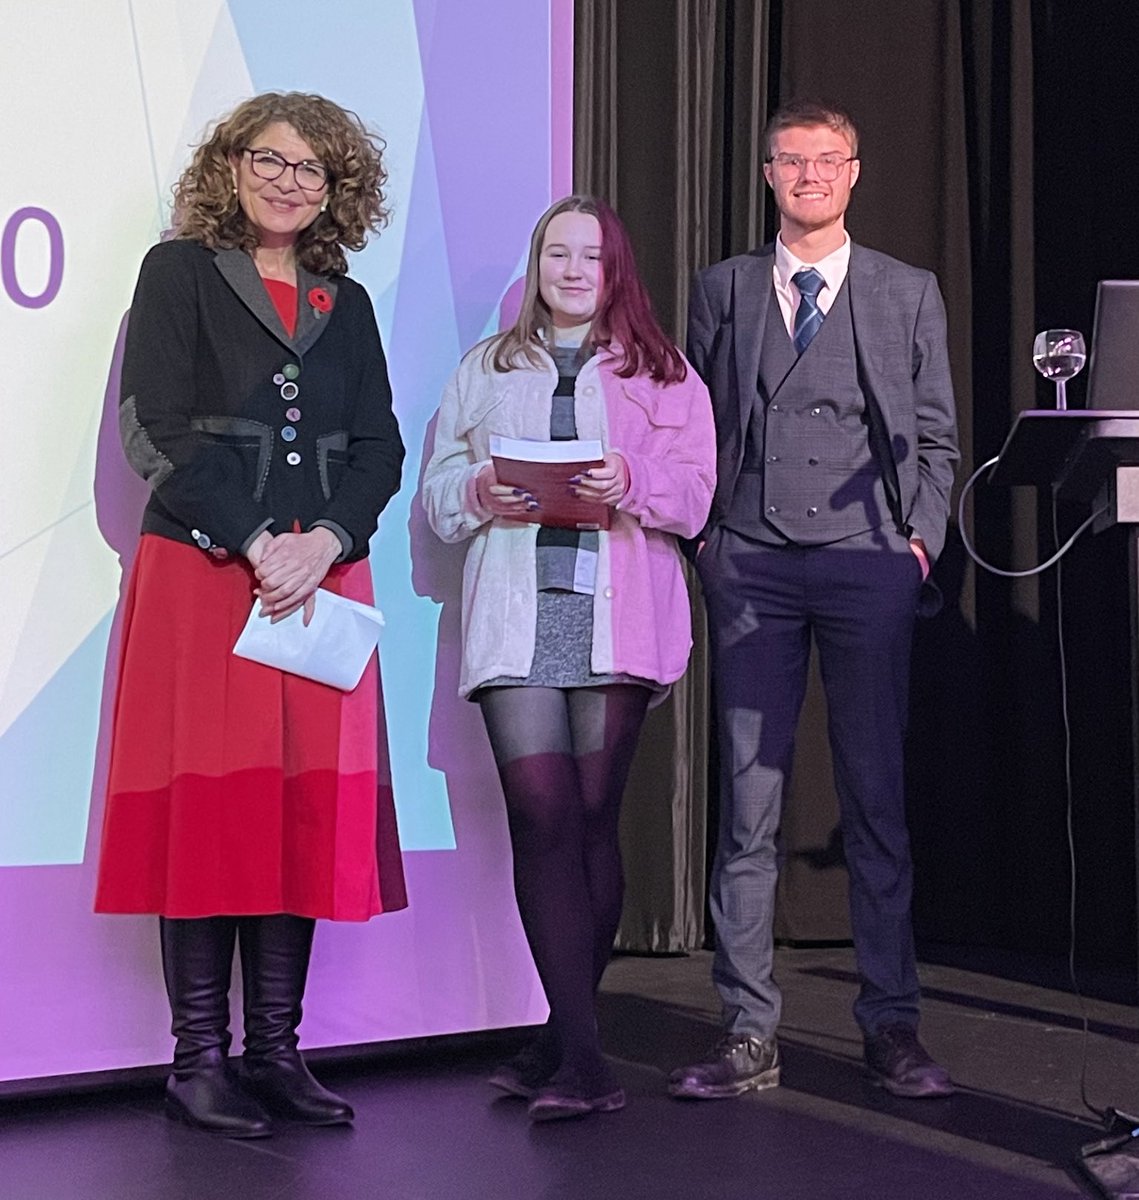 Well done to our @kevigs6form students Sam and Harriet for winning today’s competition on what should be a law. They’ve won a £50 voucher and some of @LordNortonLouth’s books 📚 Thank you to @UniOfHull for having us! #encouragingexcellence #nurturingtalent